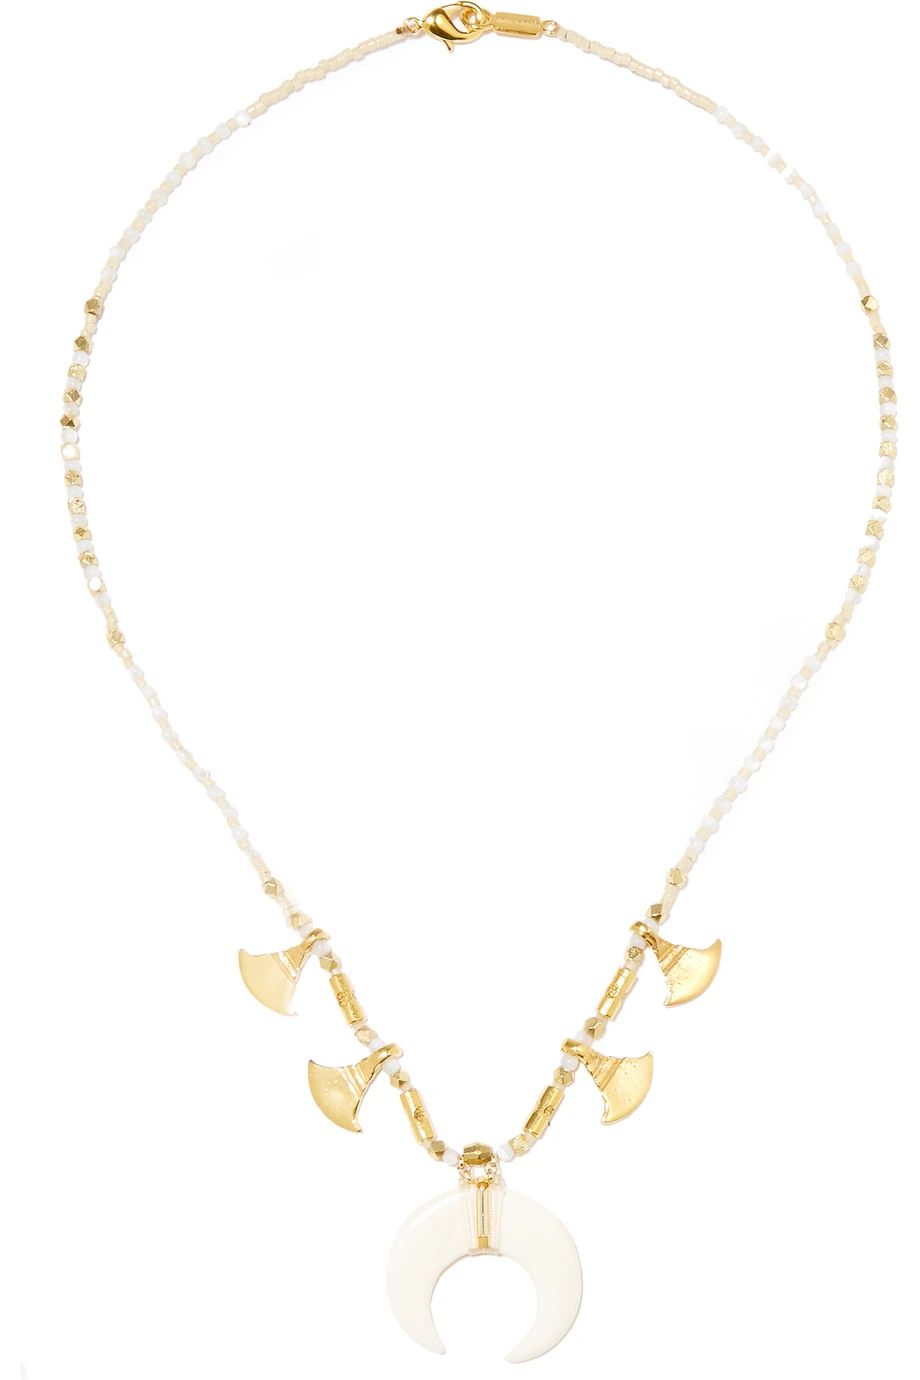 Chan Luu Gold-plated, bone and mother-of-pearl necklace, Women's | NET-A-PORTER (UK & EU)